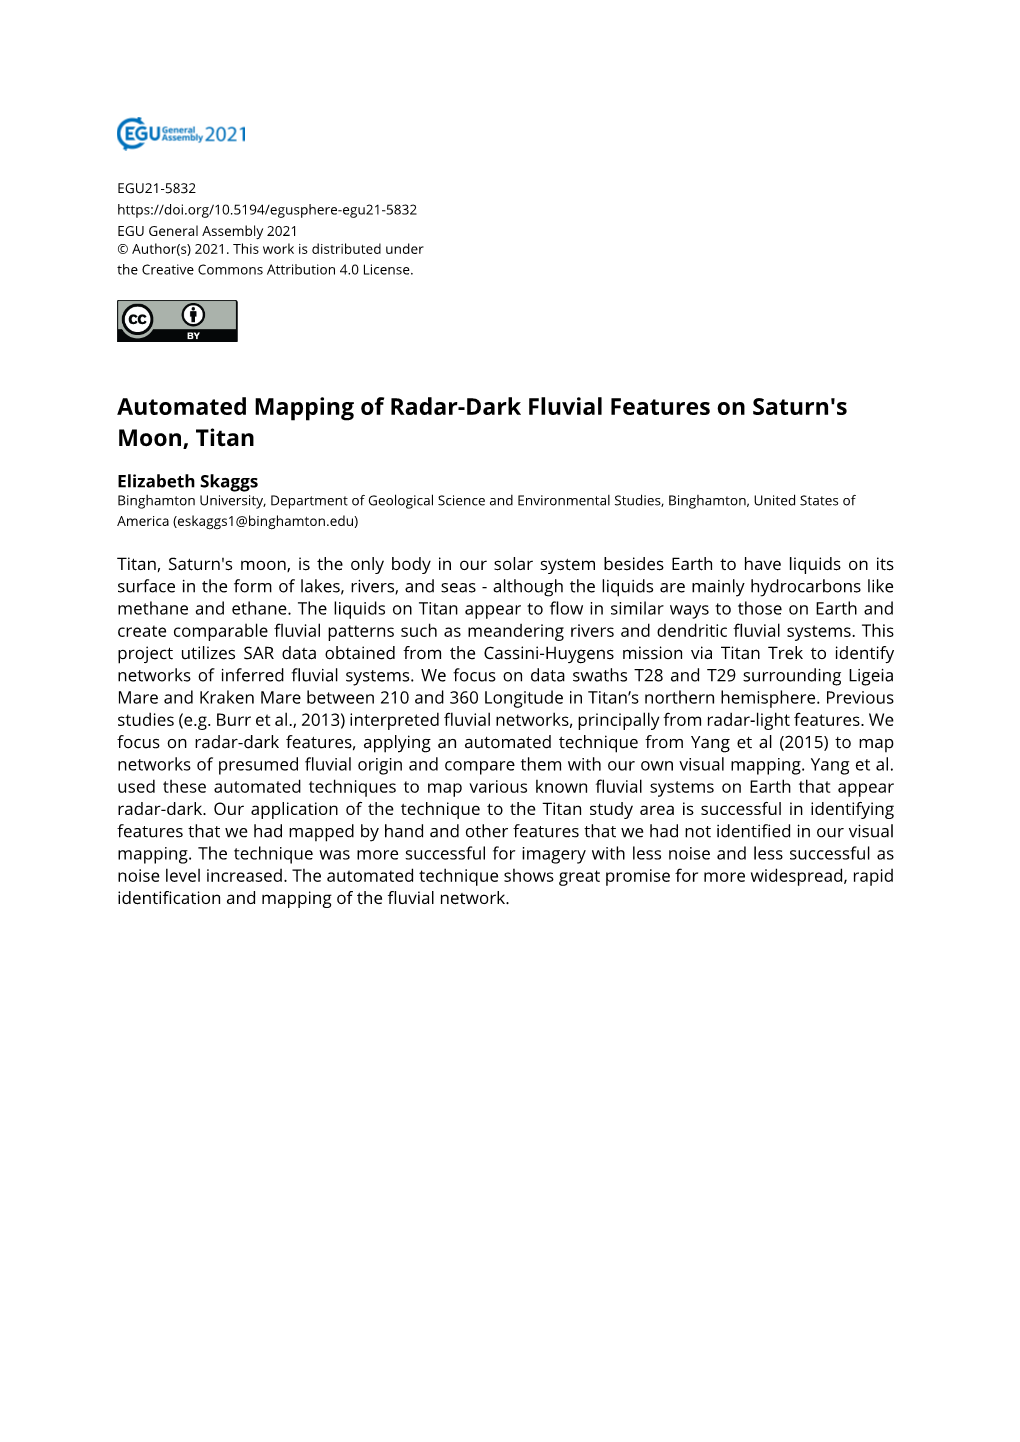 Automated Mapping of Radar-Dark Fluvial Features on Saturn's Moon, Titan